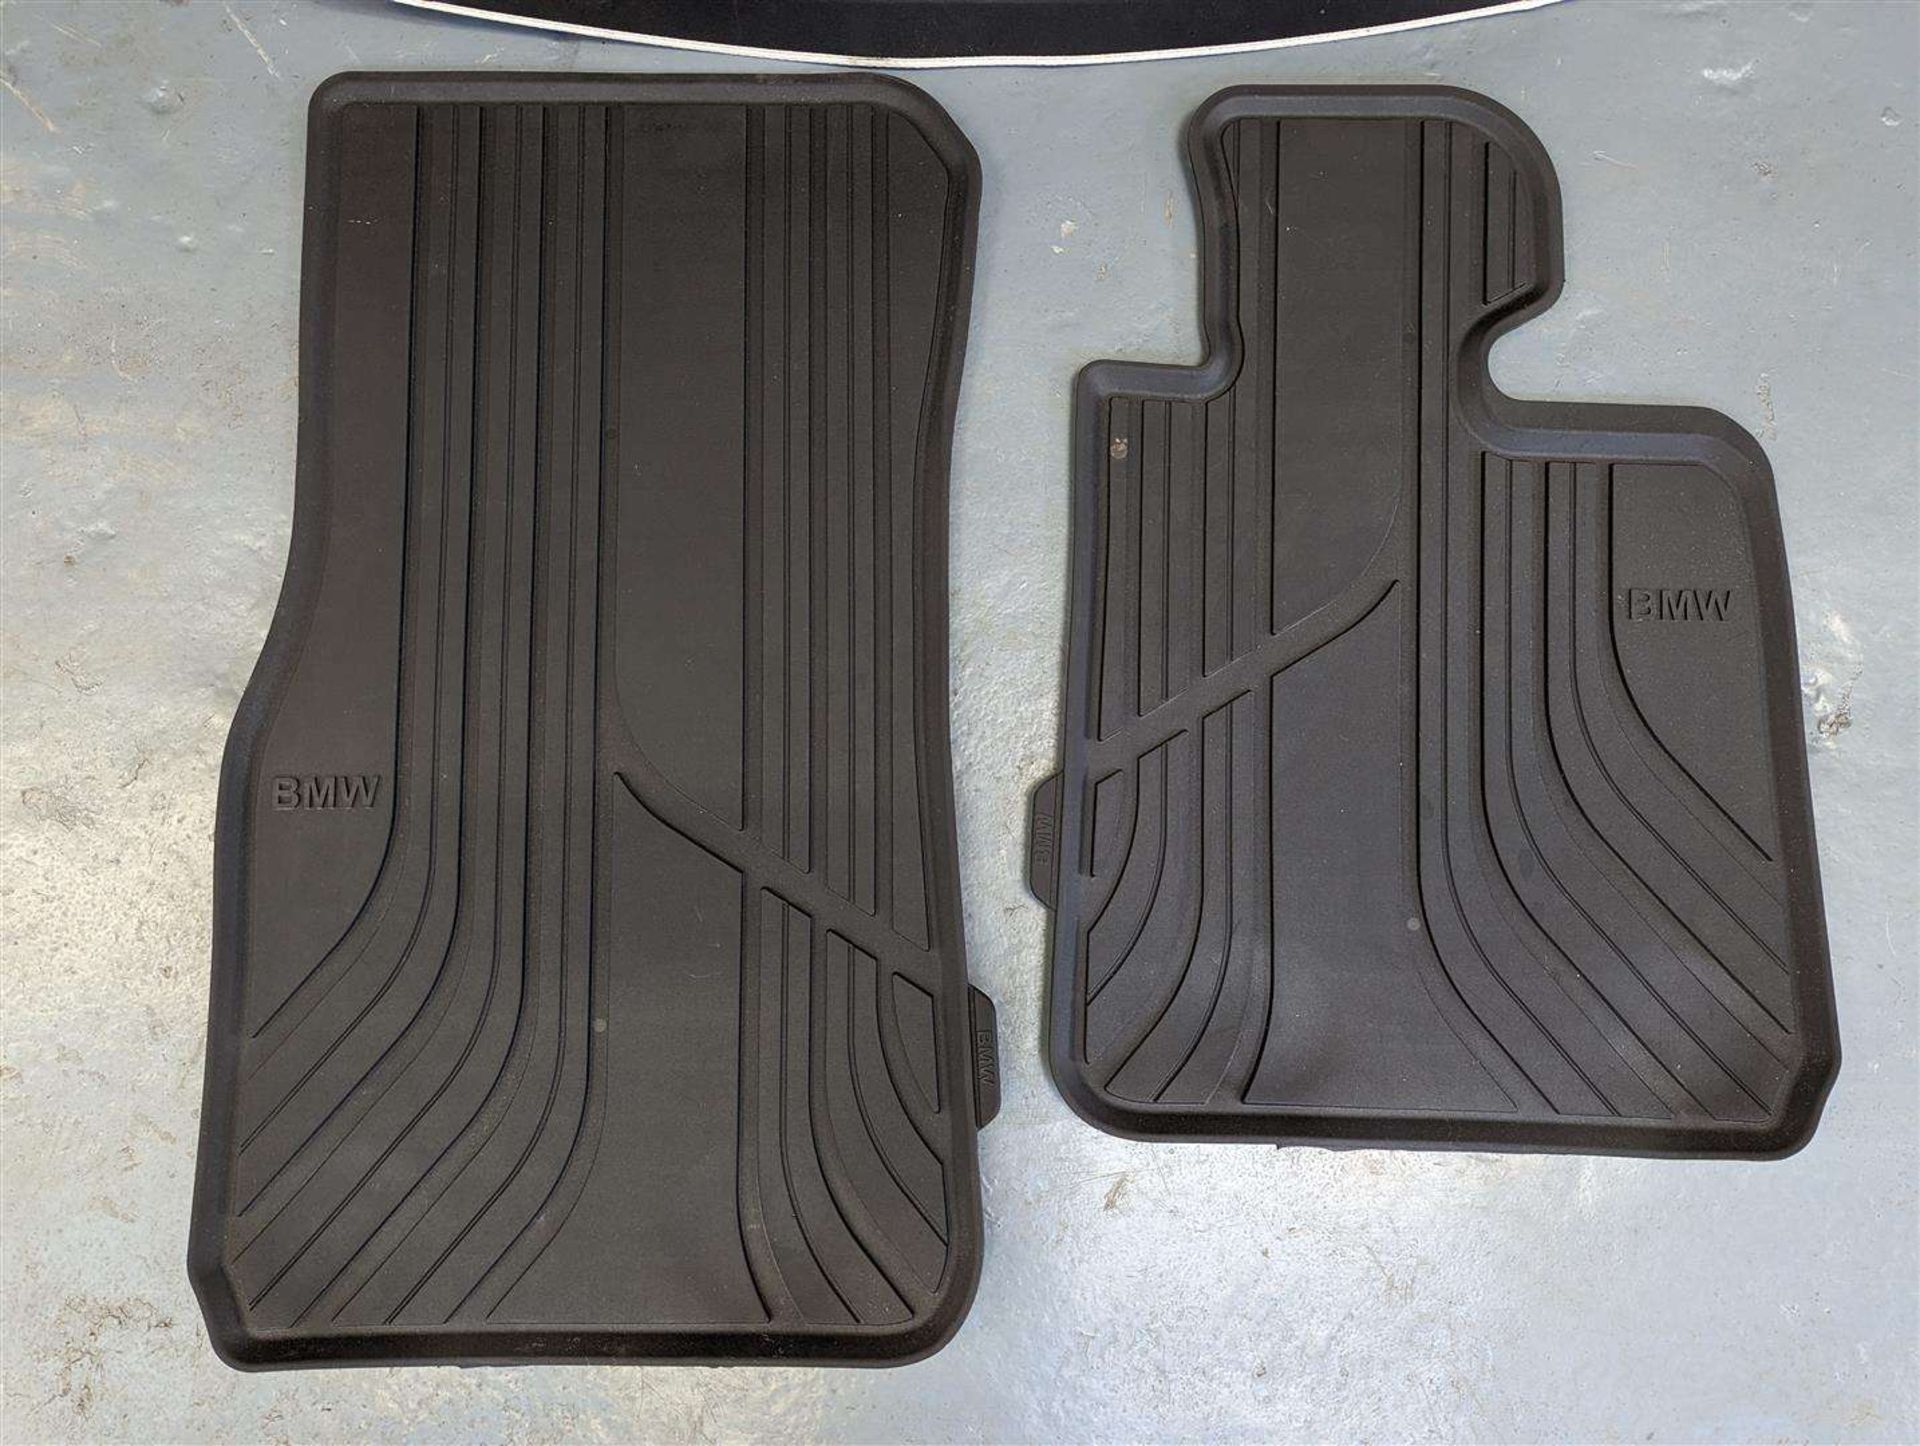 NEW BOOT TRAY &amp; FRONT RUBBER MATS FOR BMW F22 COUPE MODEL - Image 2 of 3